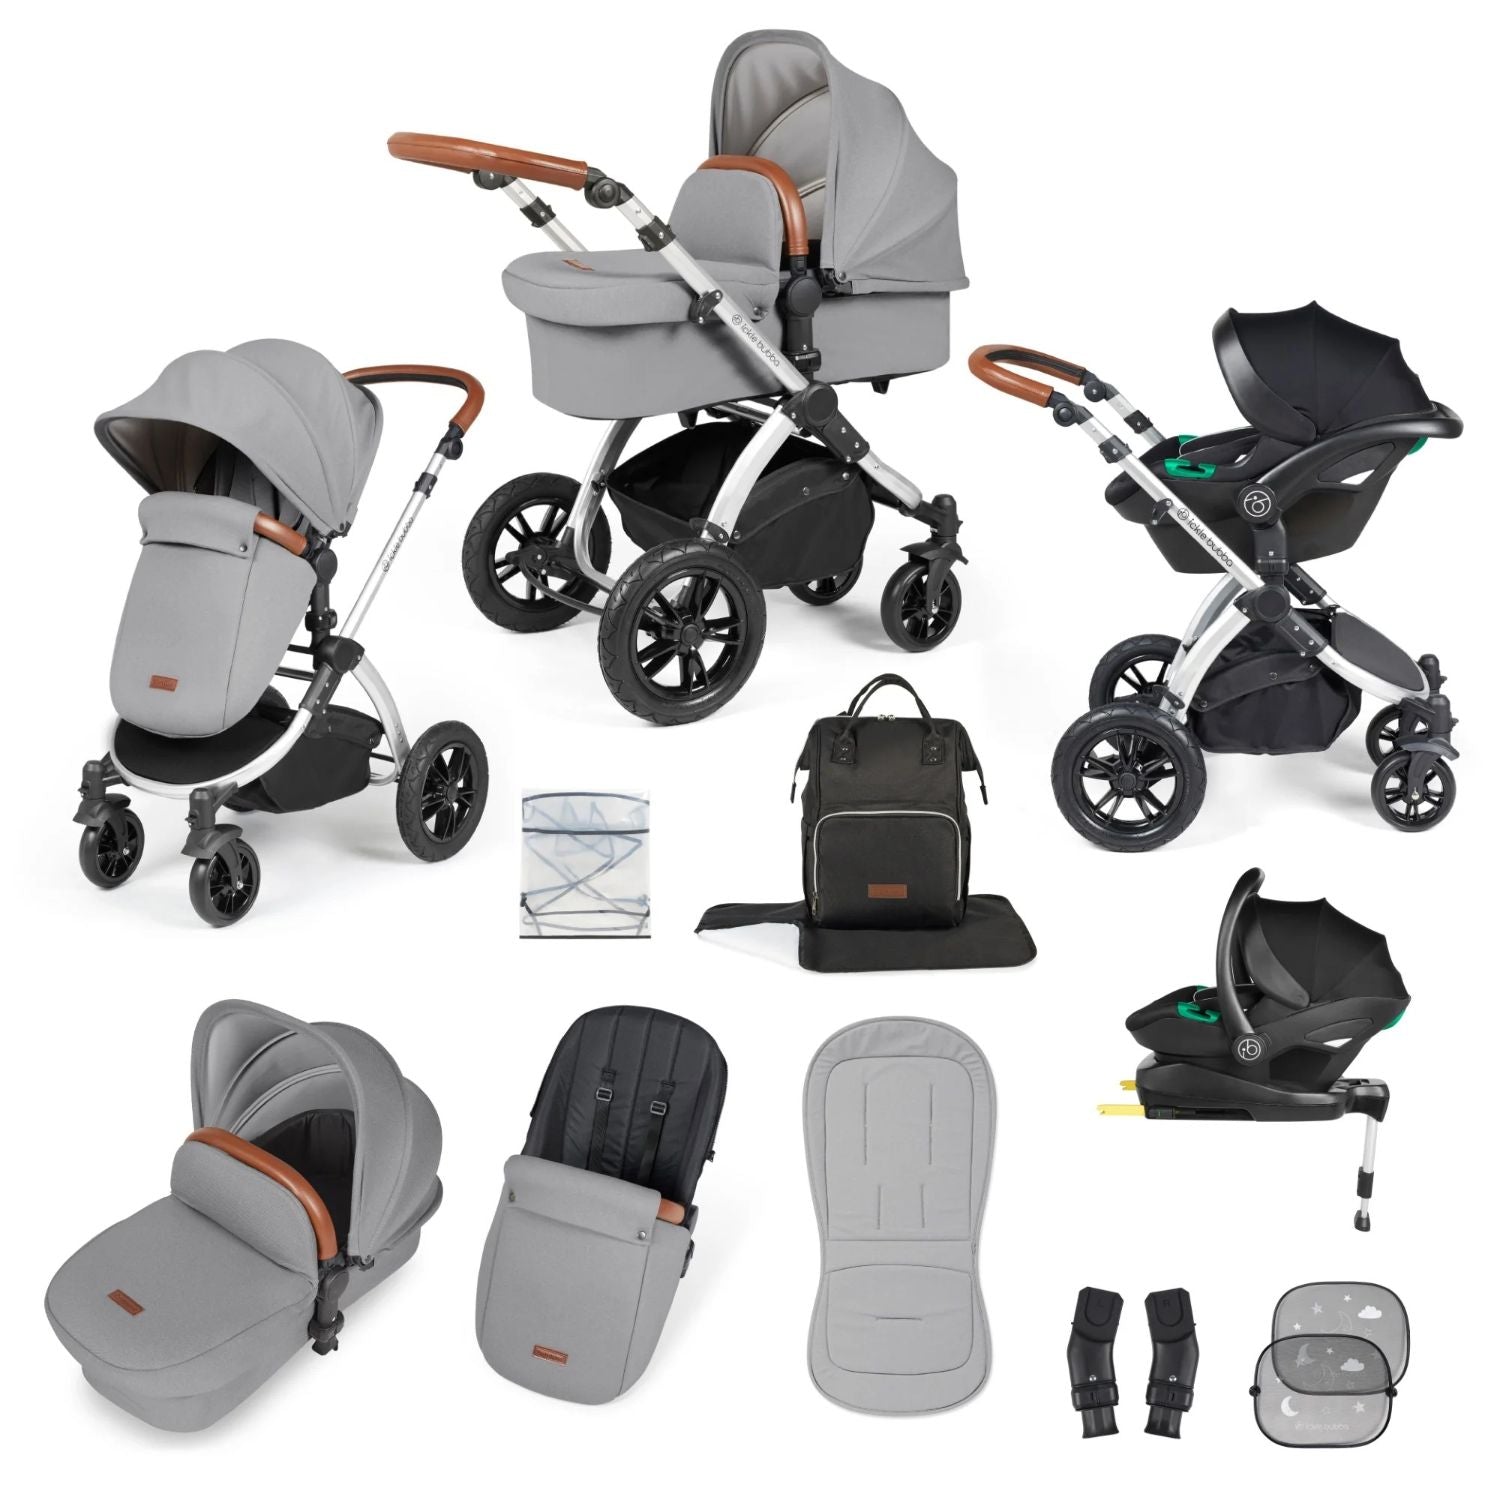 Ickle Bubba Stomp Luxe All-in-One Travel System with Stratus i-Size Car Seat and ISOFIX Base and accessories in Pearl Grey colour with silver chassis and tan handle